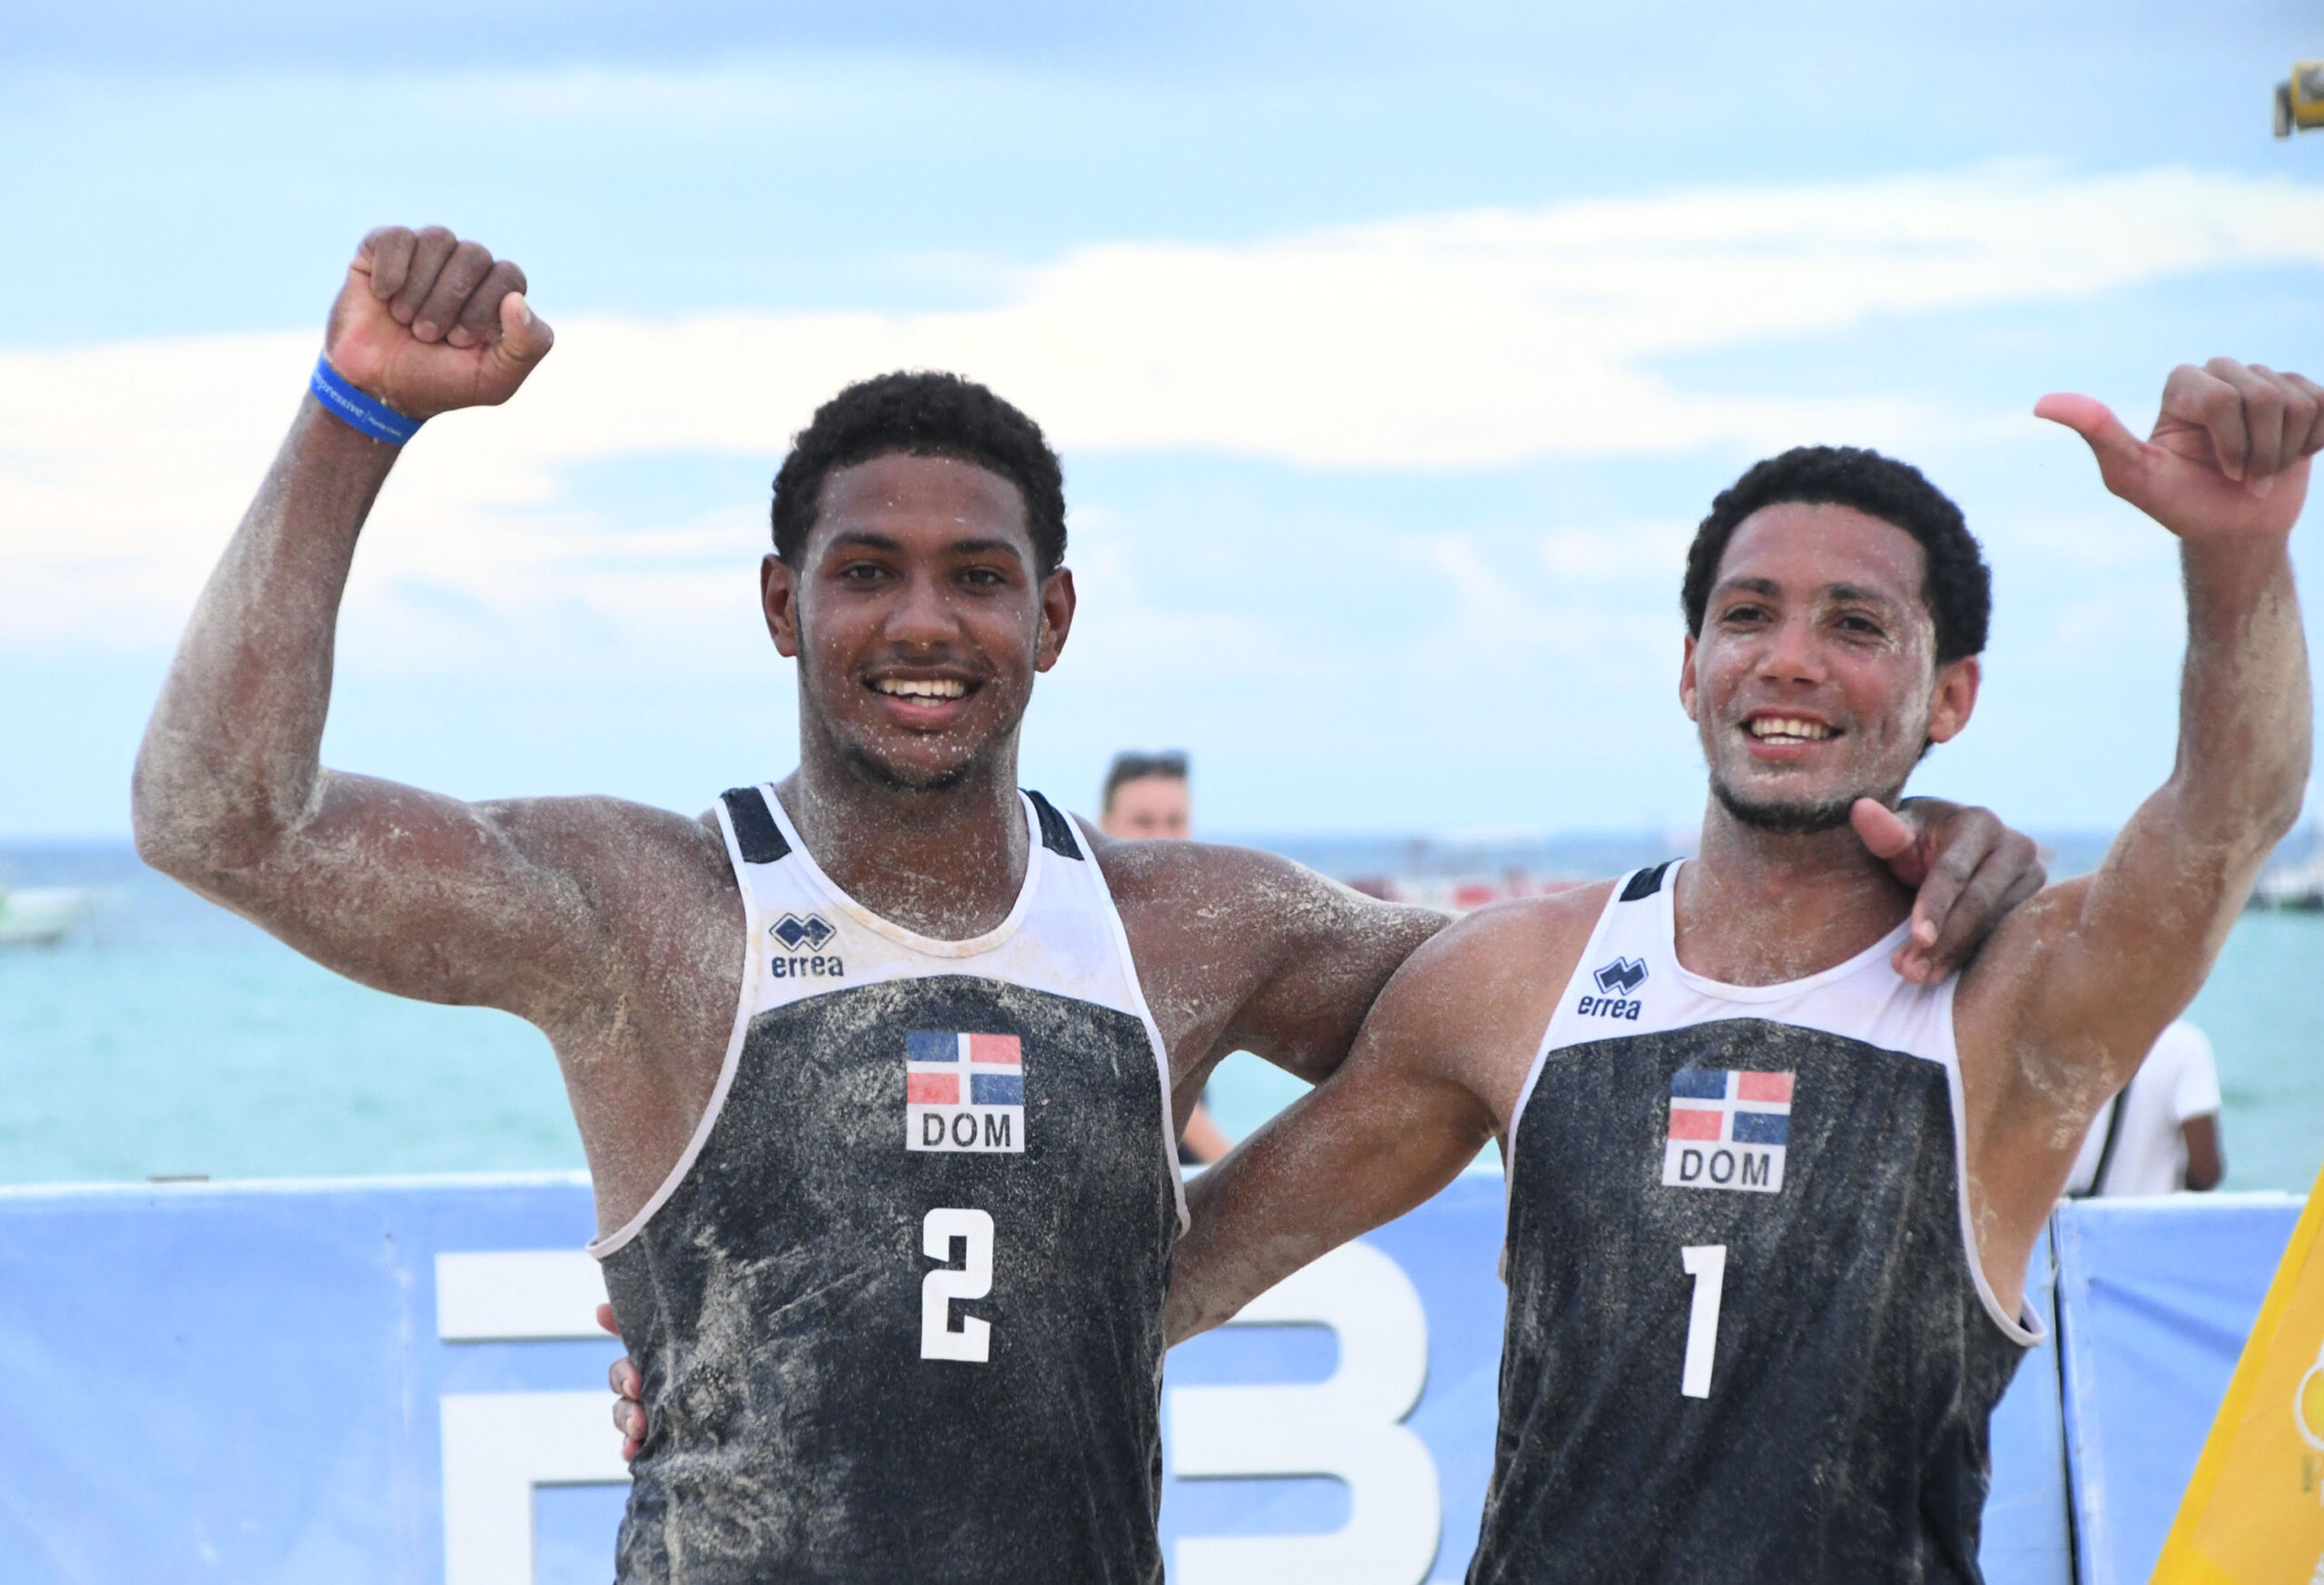 Dominicans Martinez and De Jesus advance to semifinals in Punta Cana